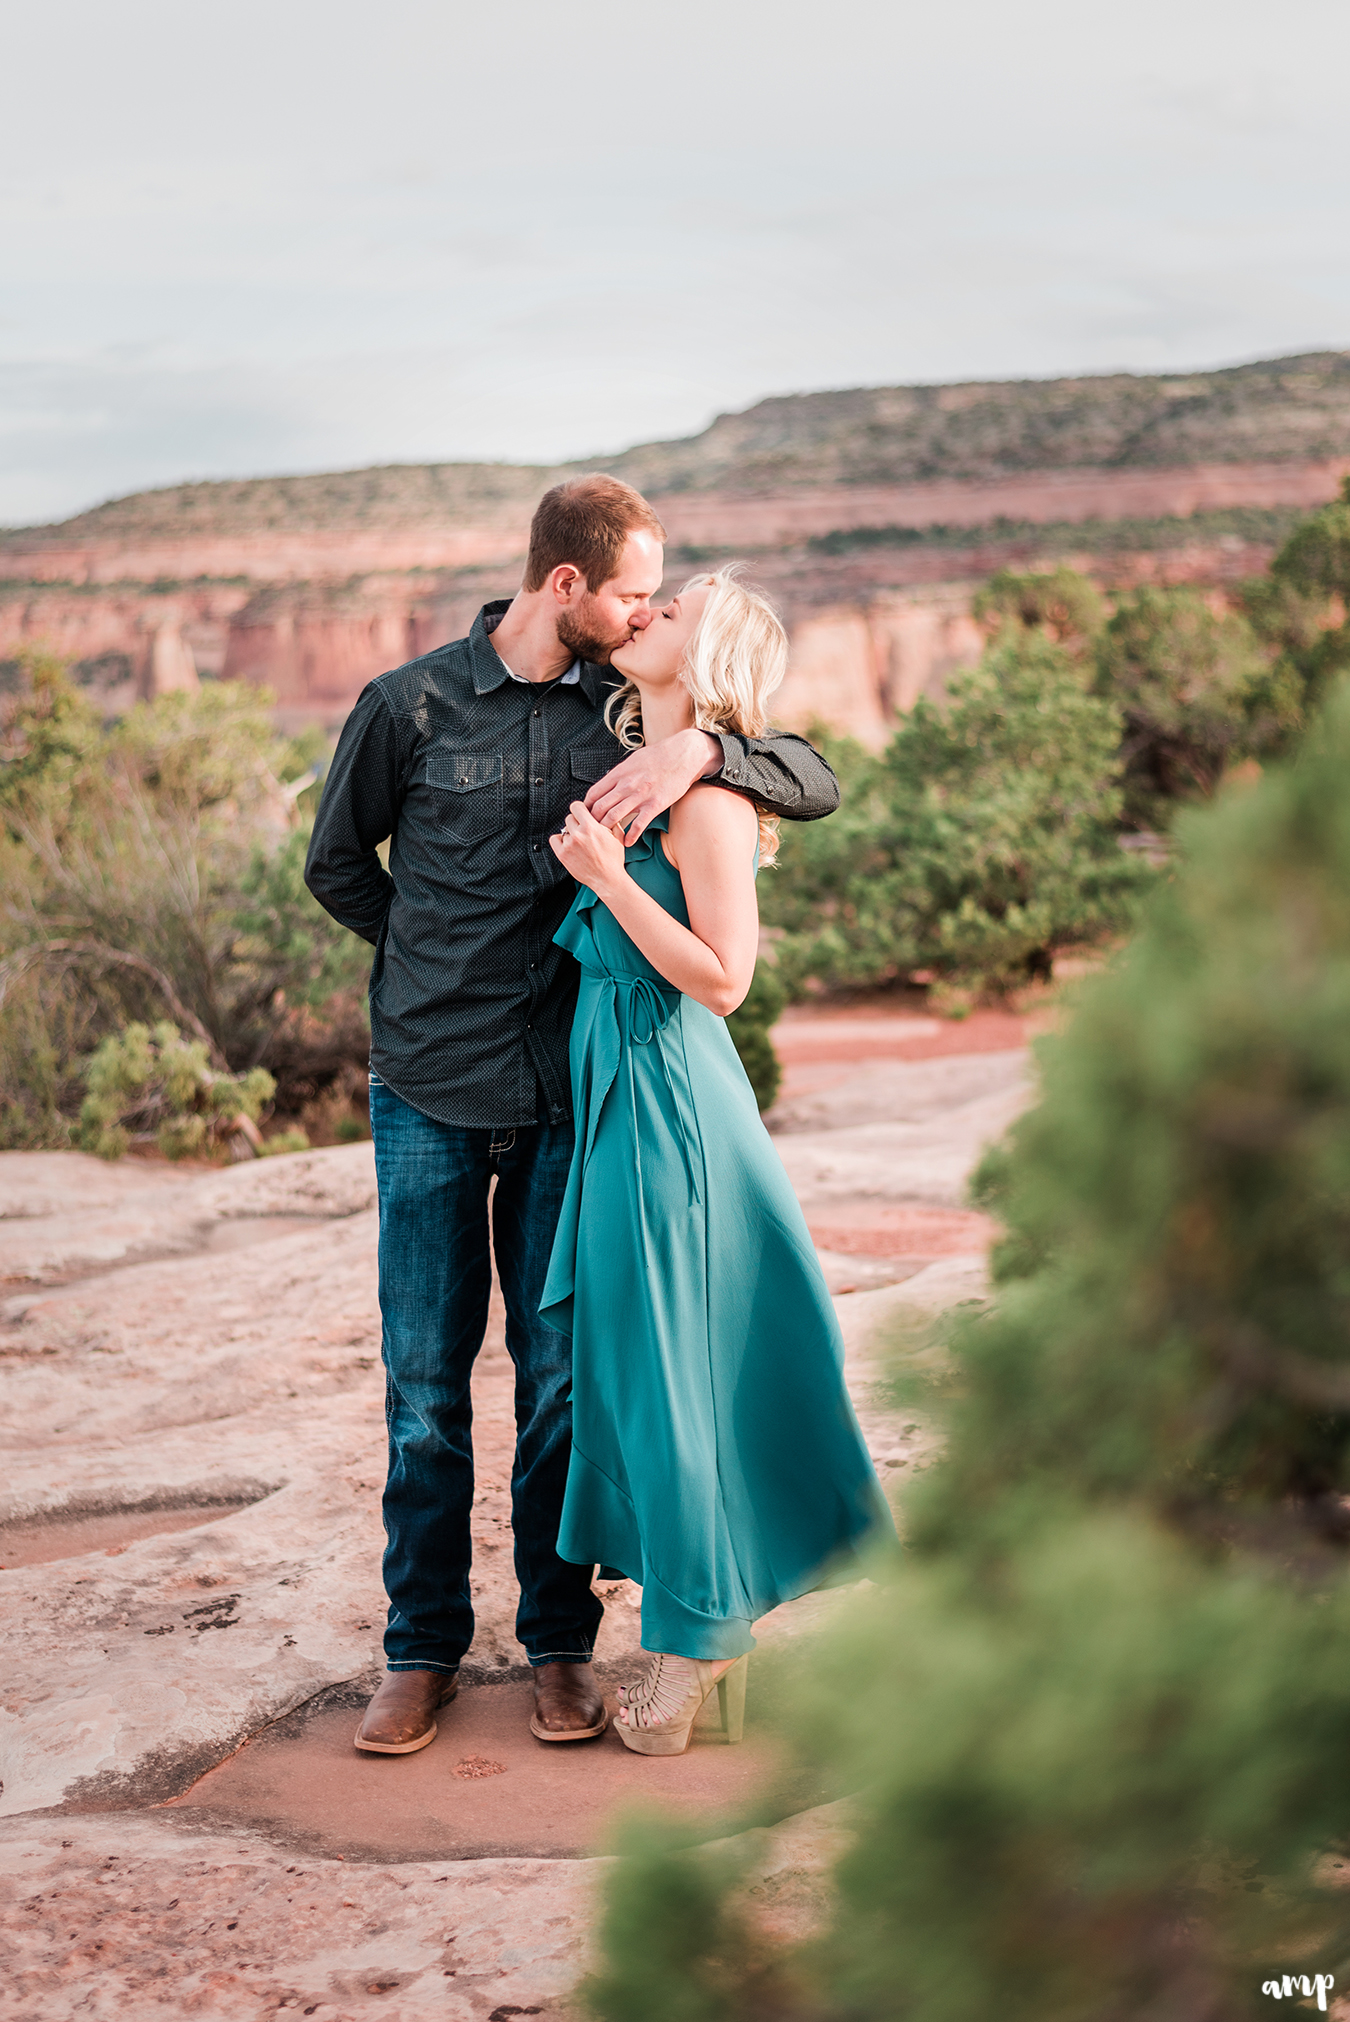 Dylan and Lexi share a kiss on the Colorado National Monument for their engagement photos